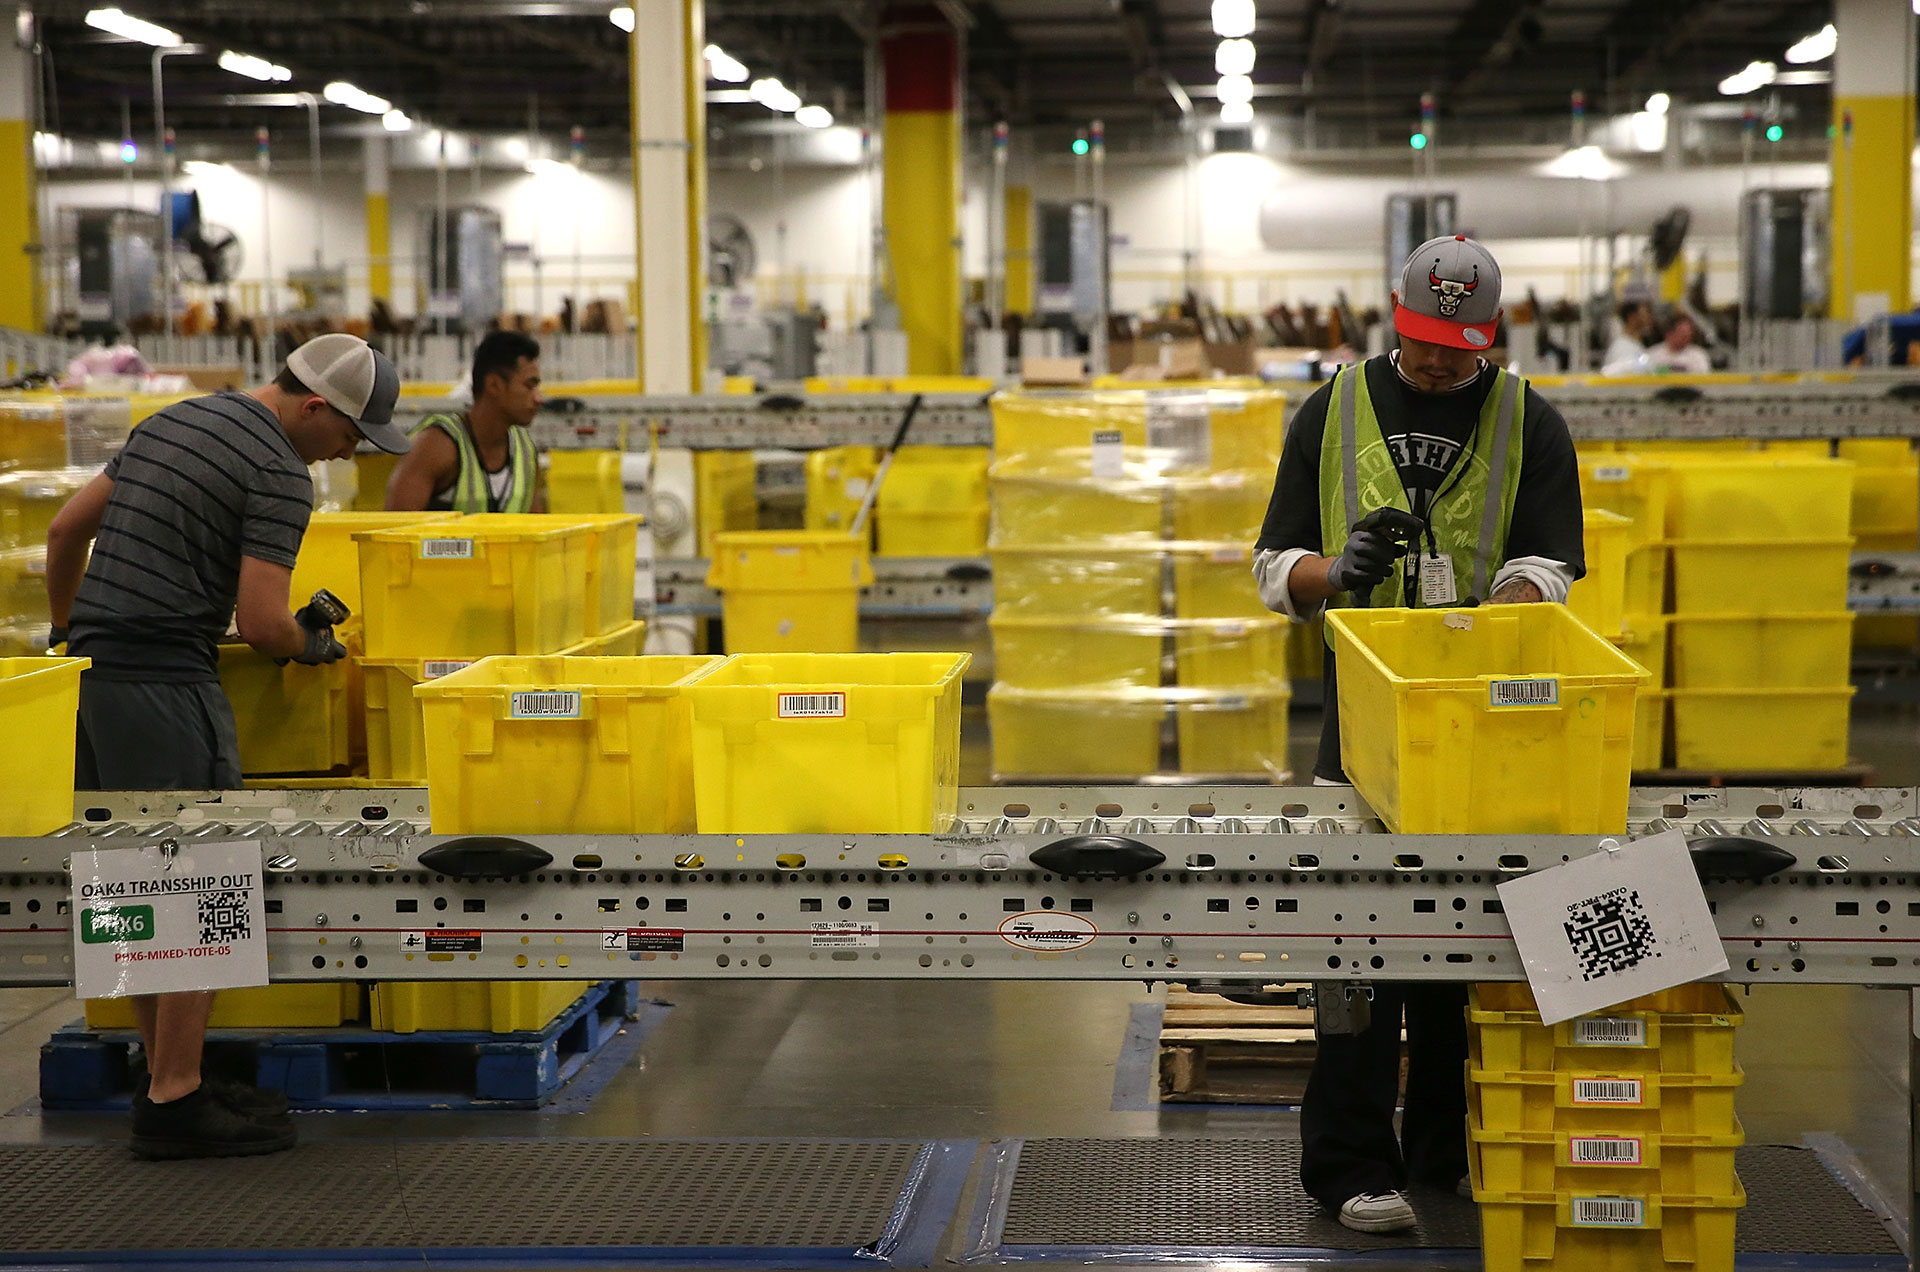 Workers pack orders at an Amazon fulfillment center in Tracy.